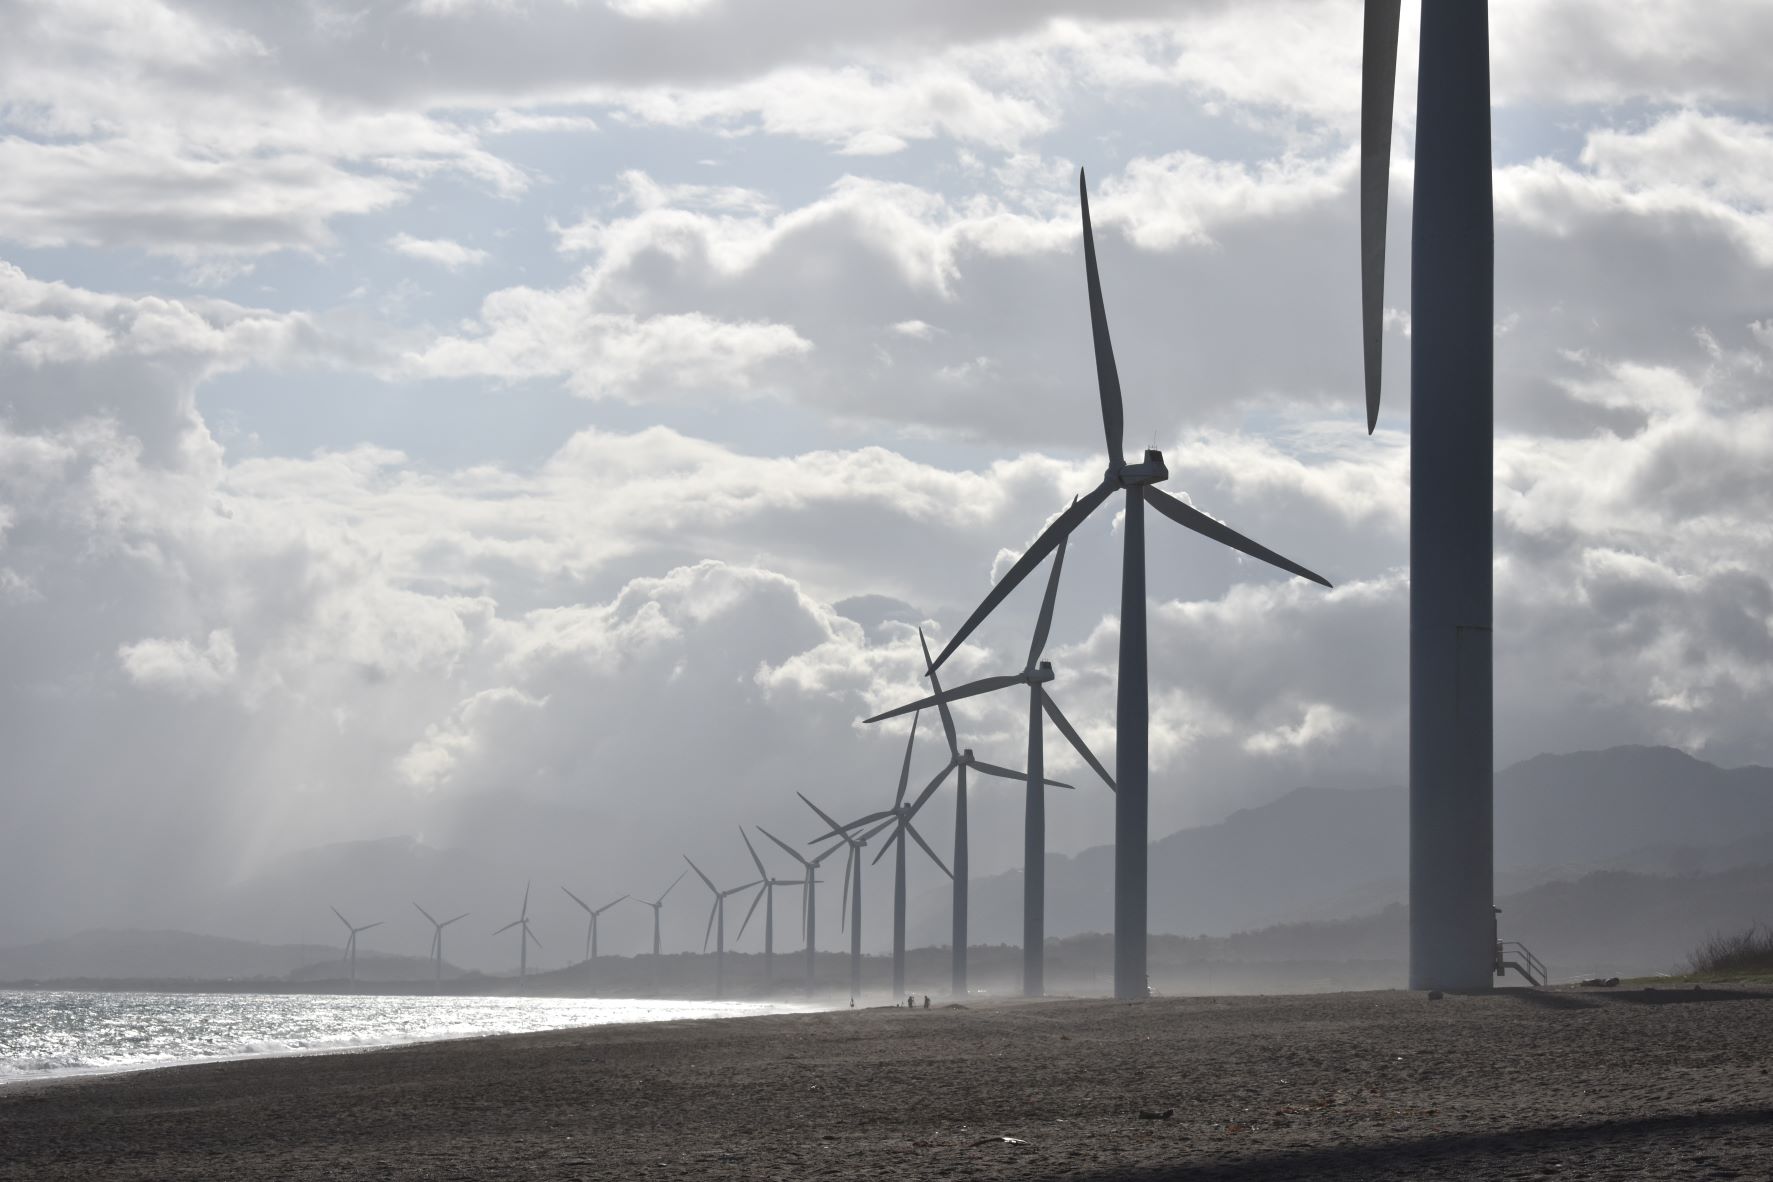 A line of wind turbines on the beach. Photo by Jem Sanchez from Pexels